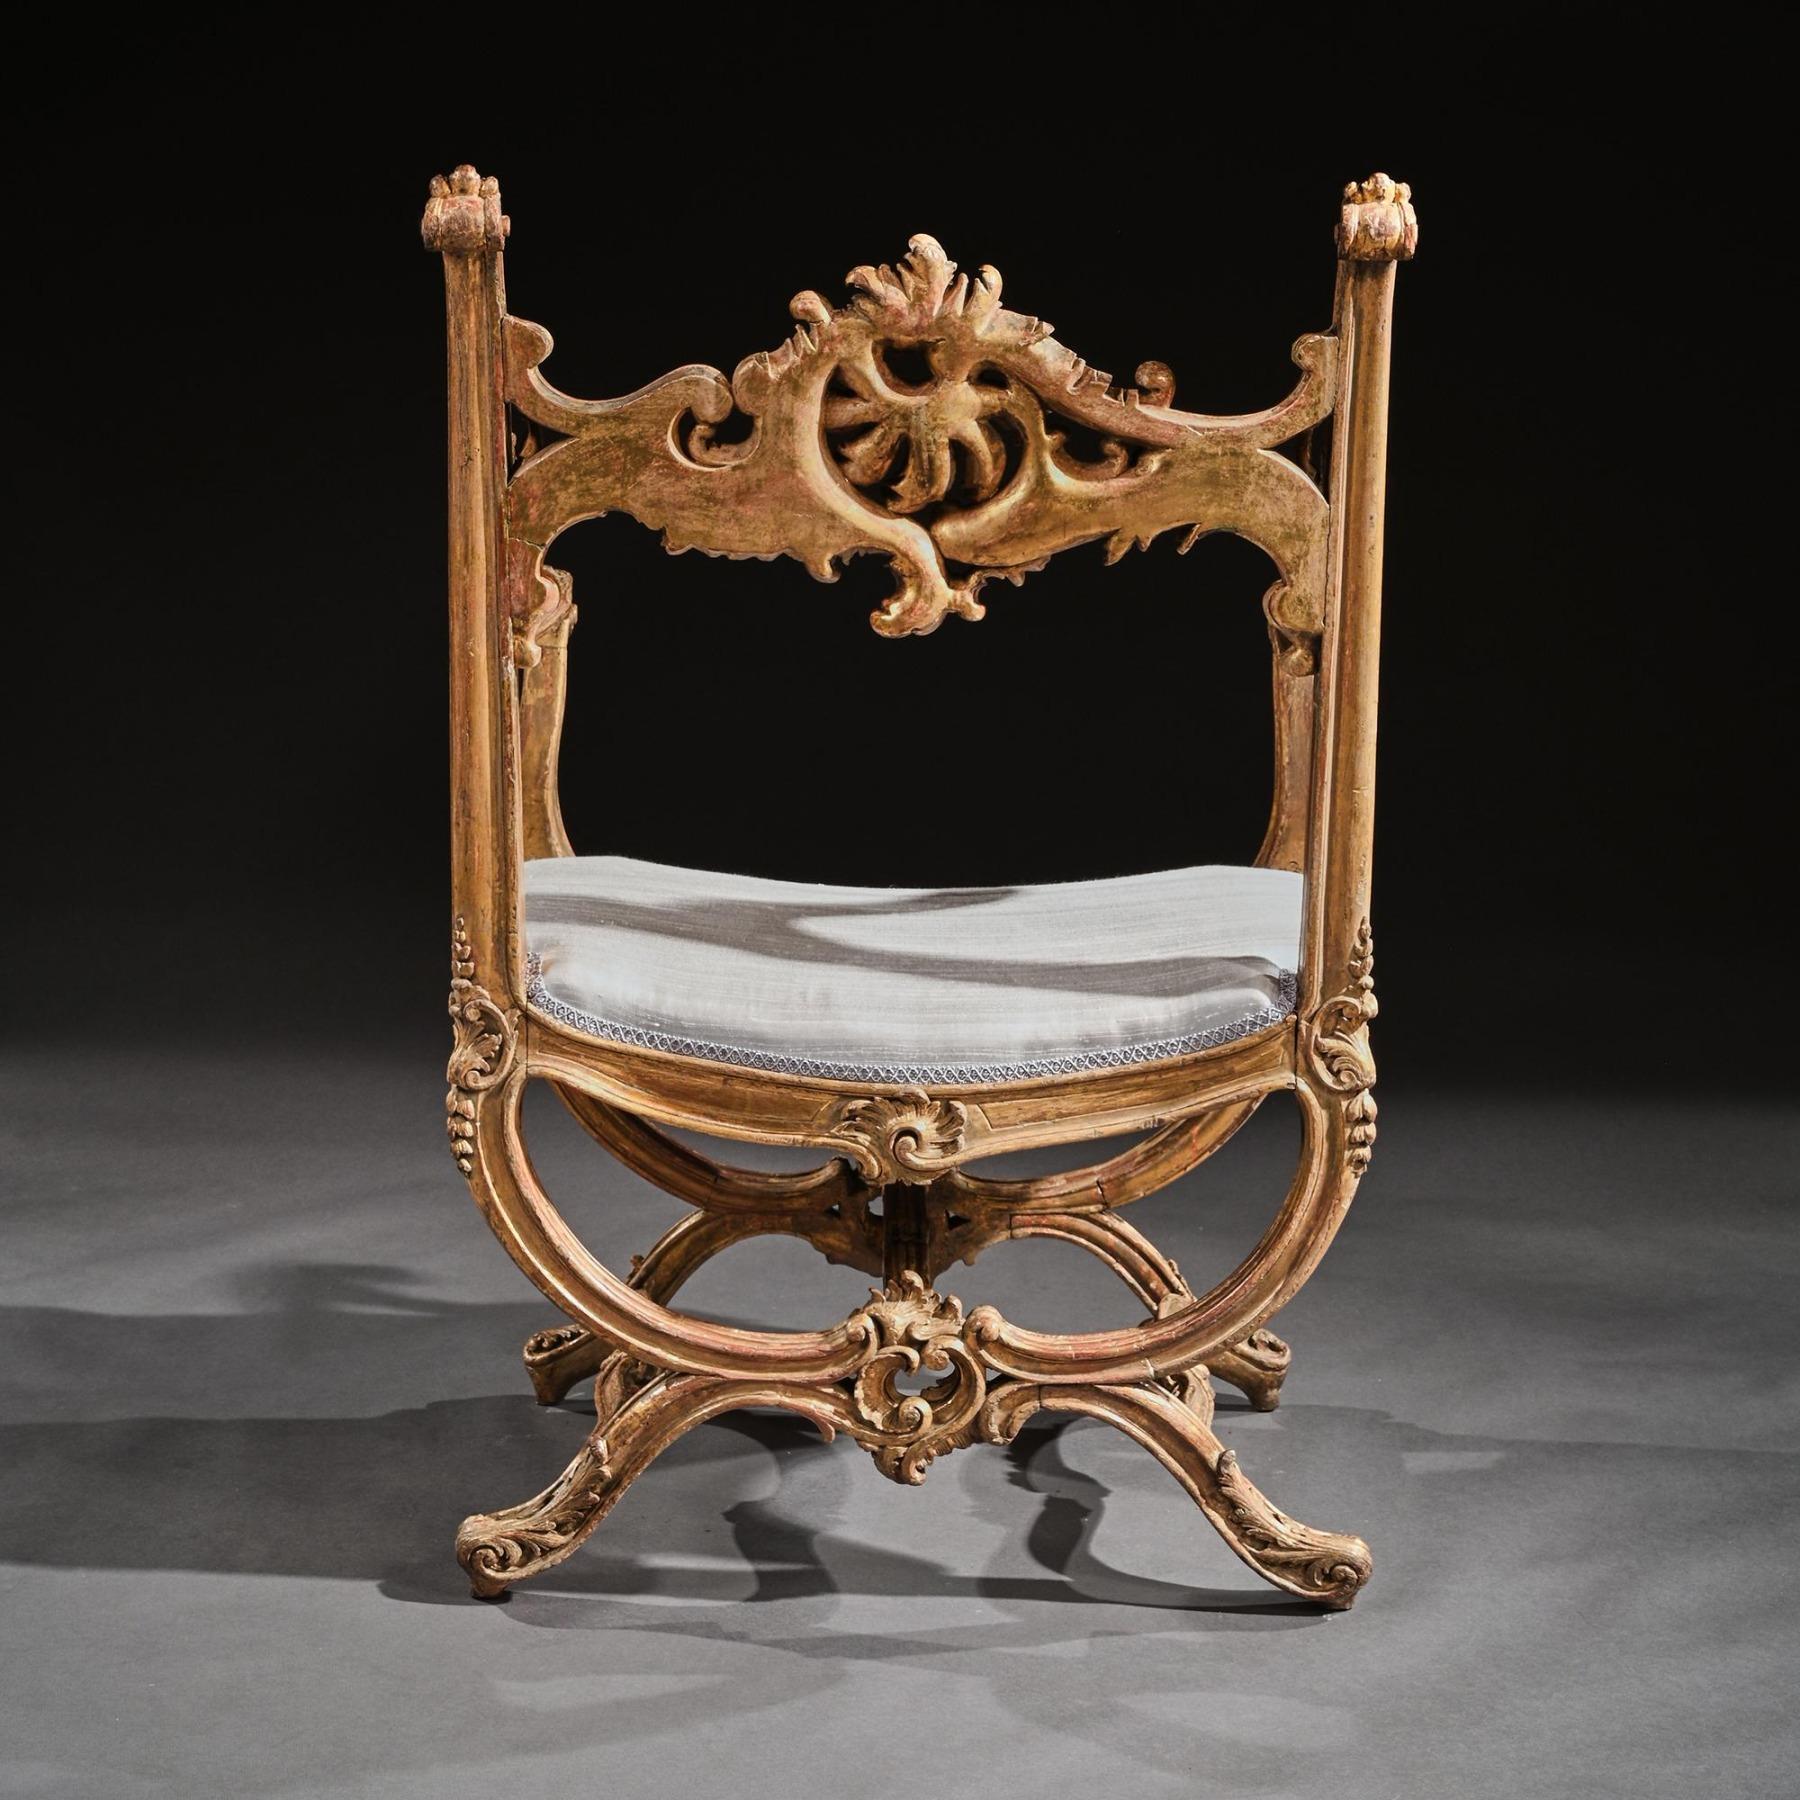 Fine 19th Century Italian Venetian Carved Giltwood Armchair In Good Condition For Sale In Benington, Herts